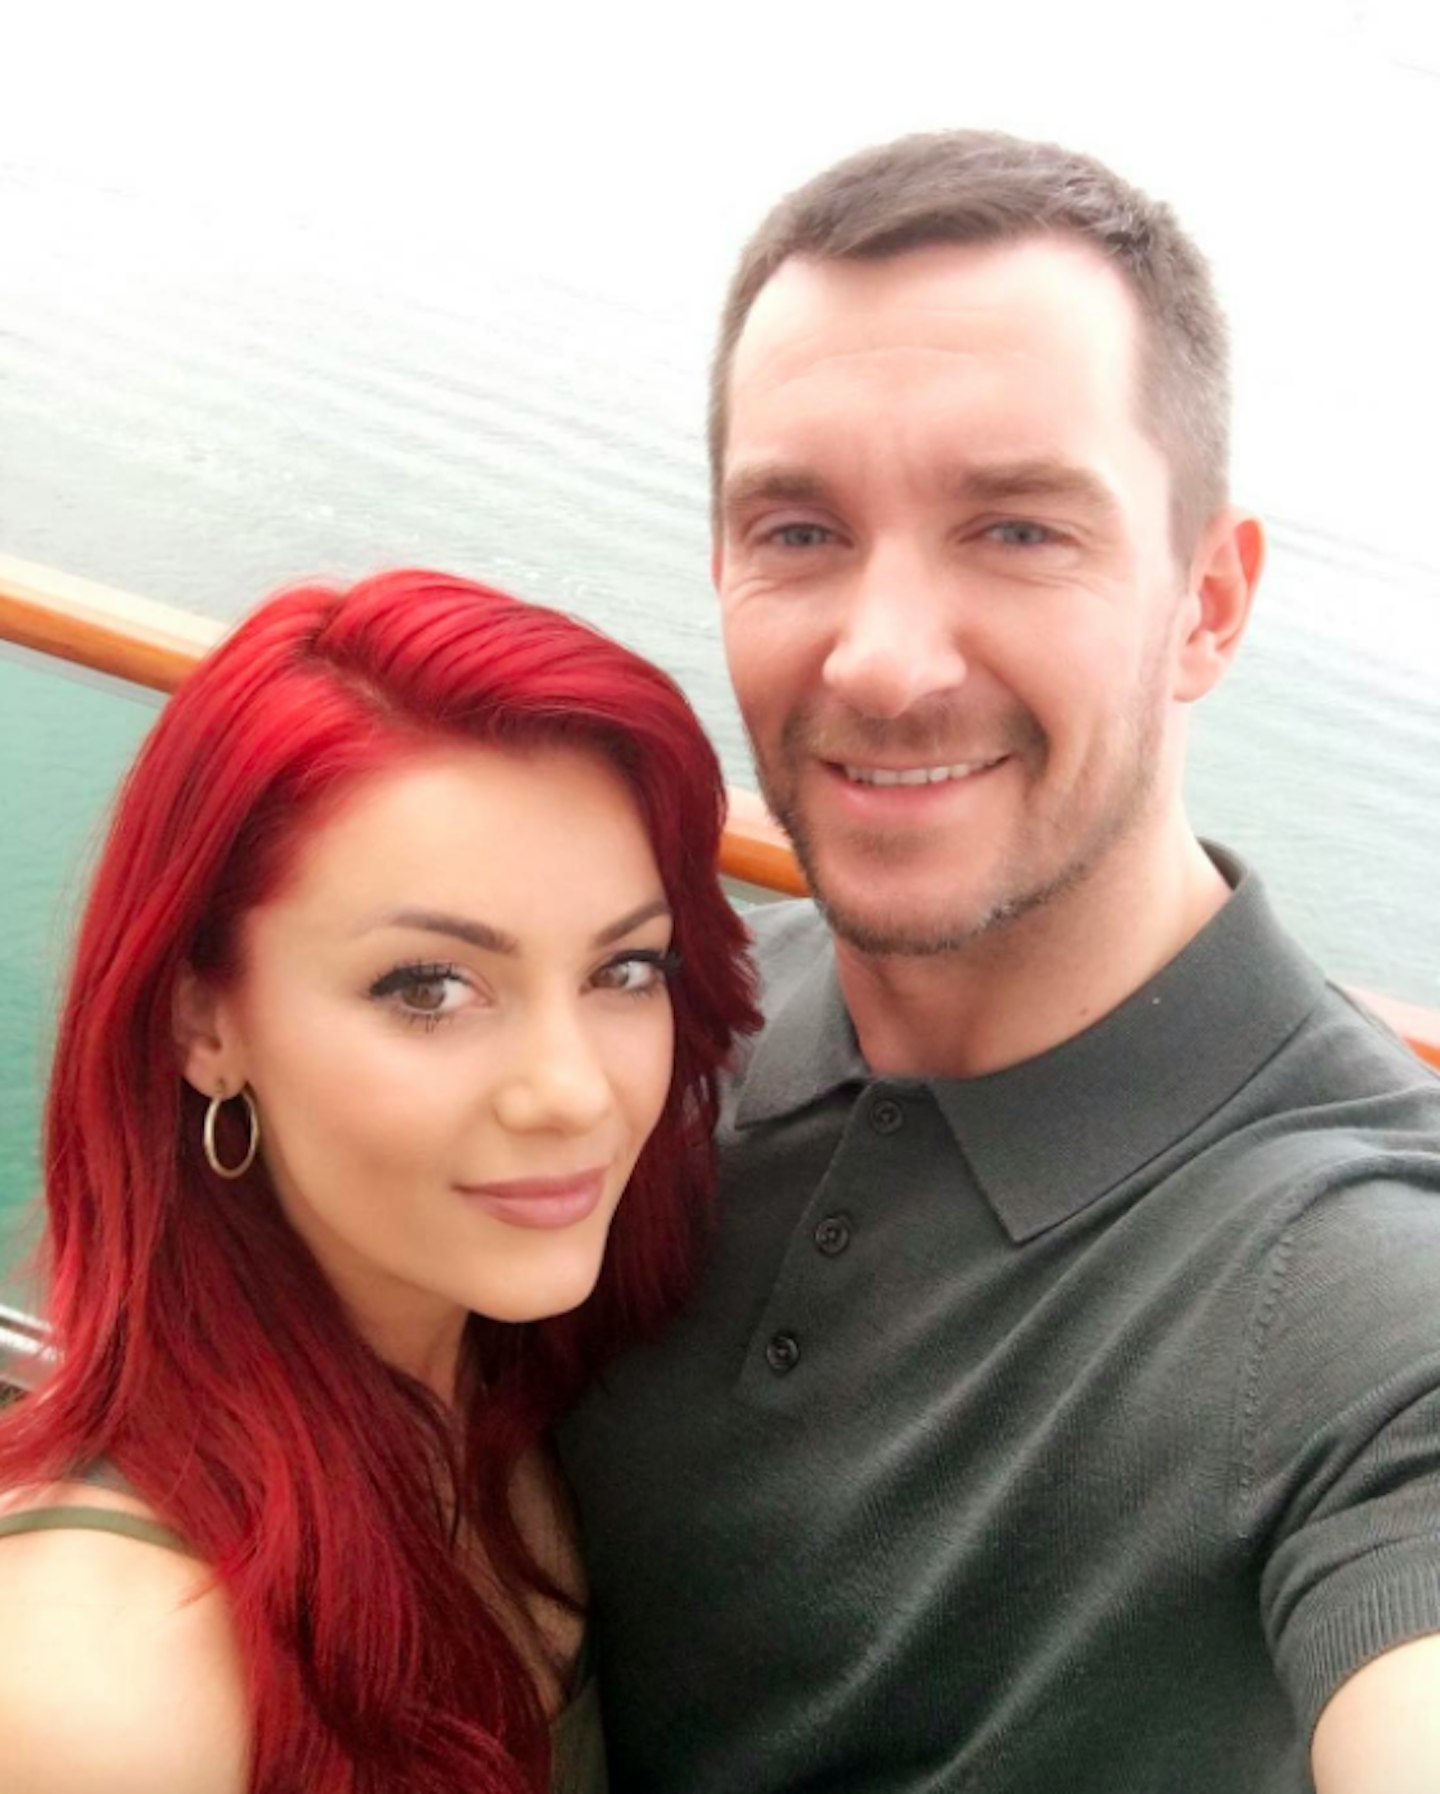 Dianne Buswell and Anthony Quinlan